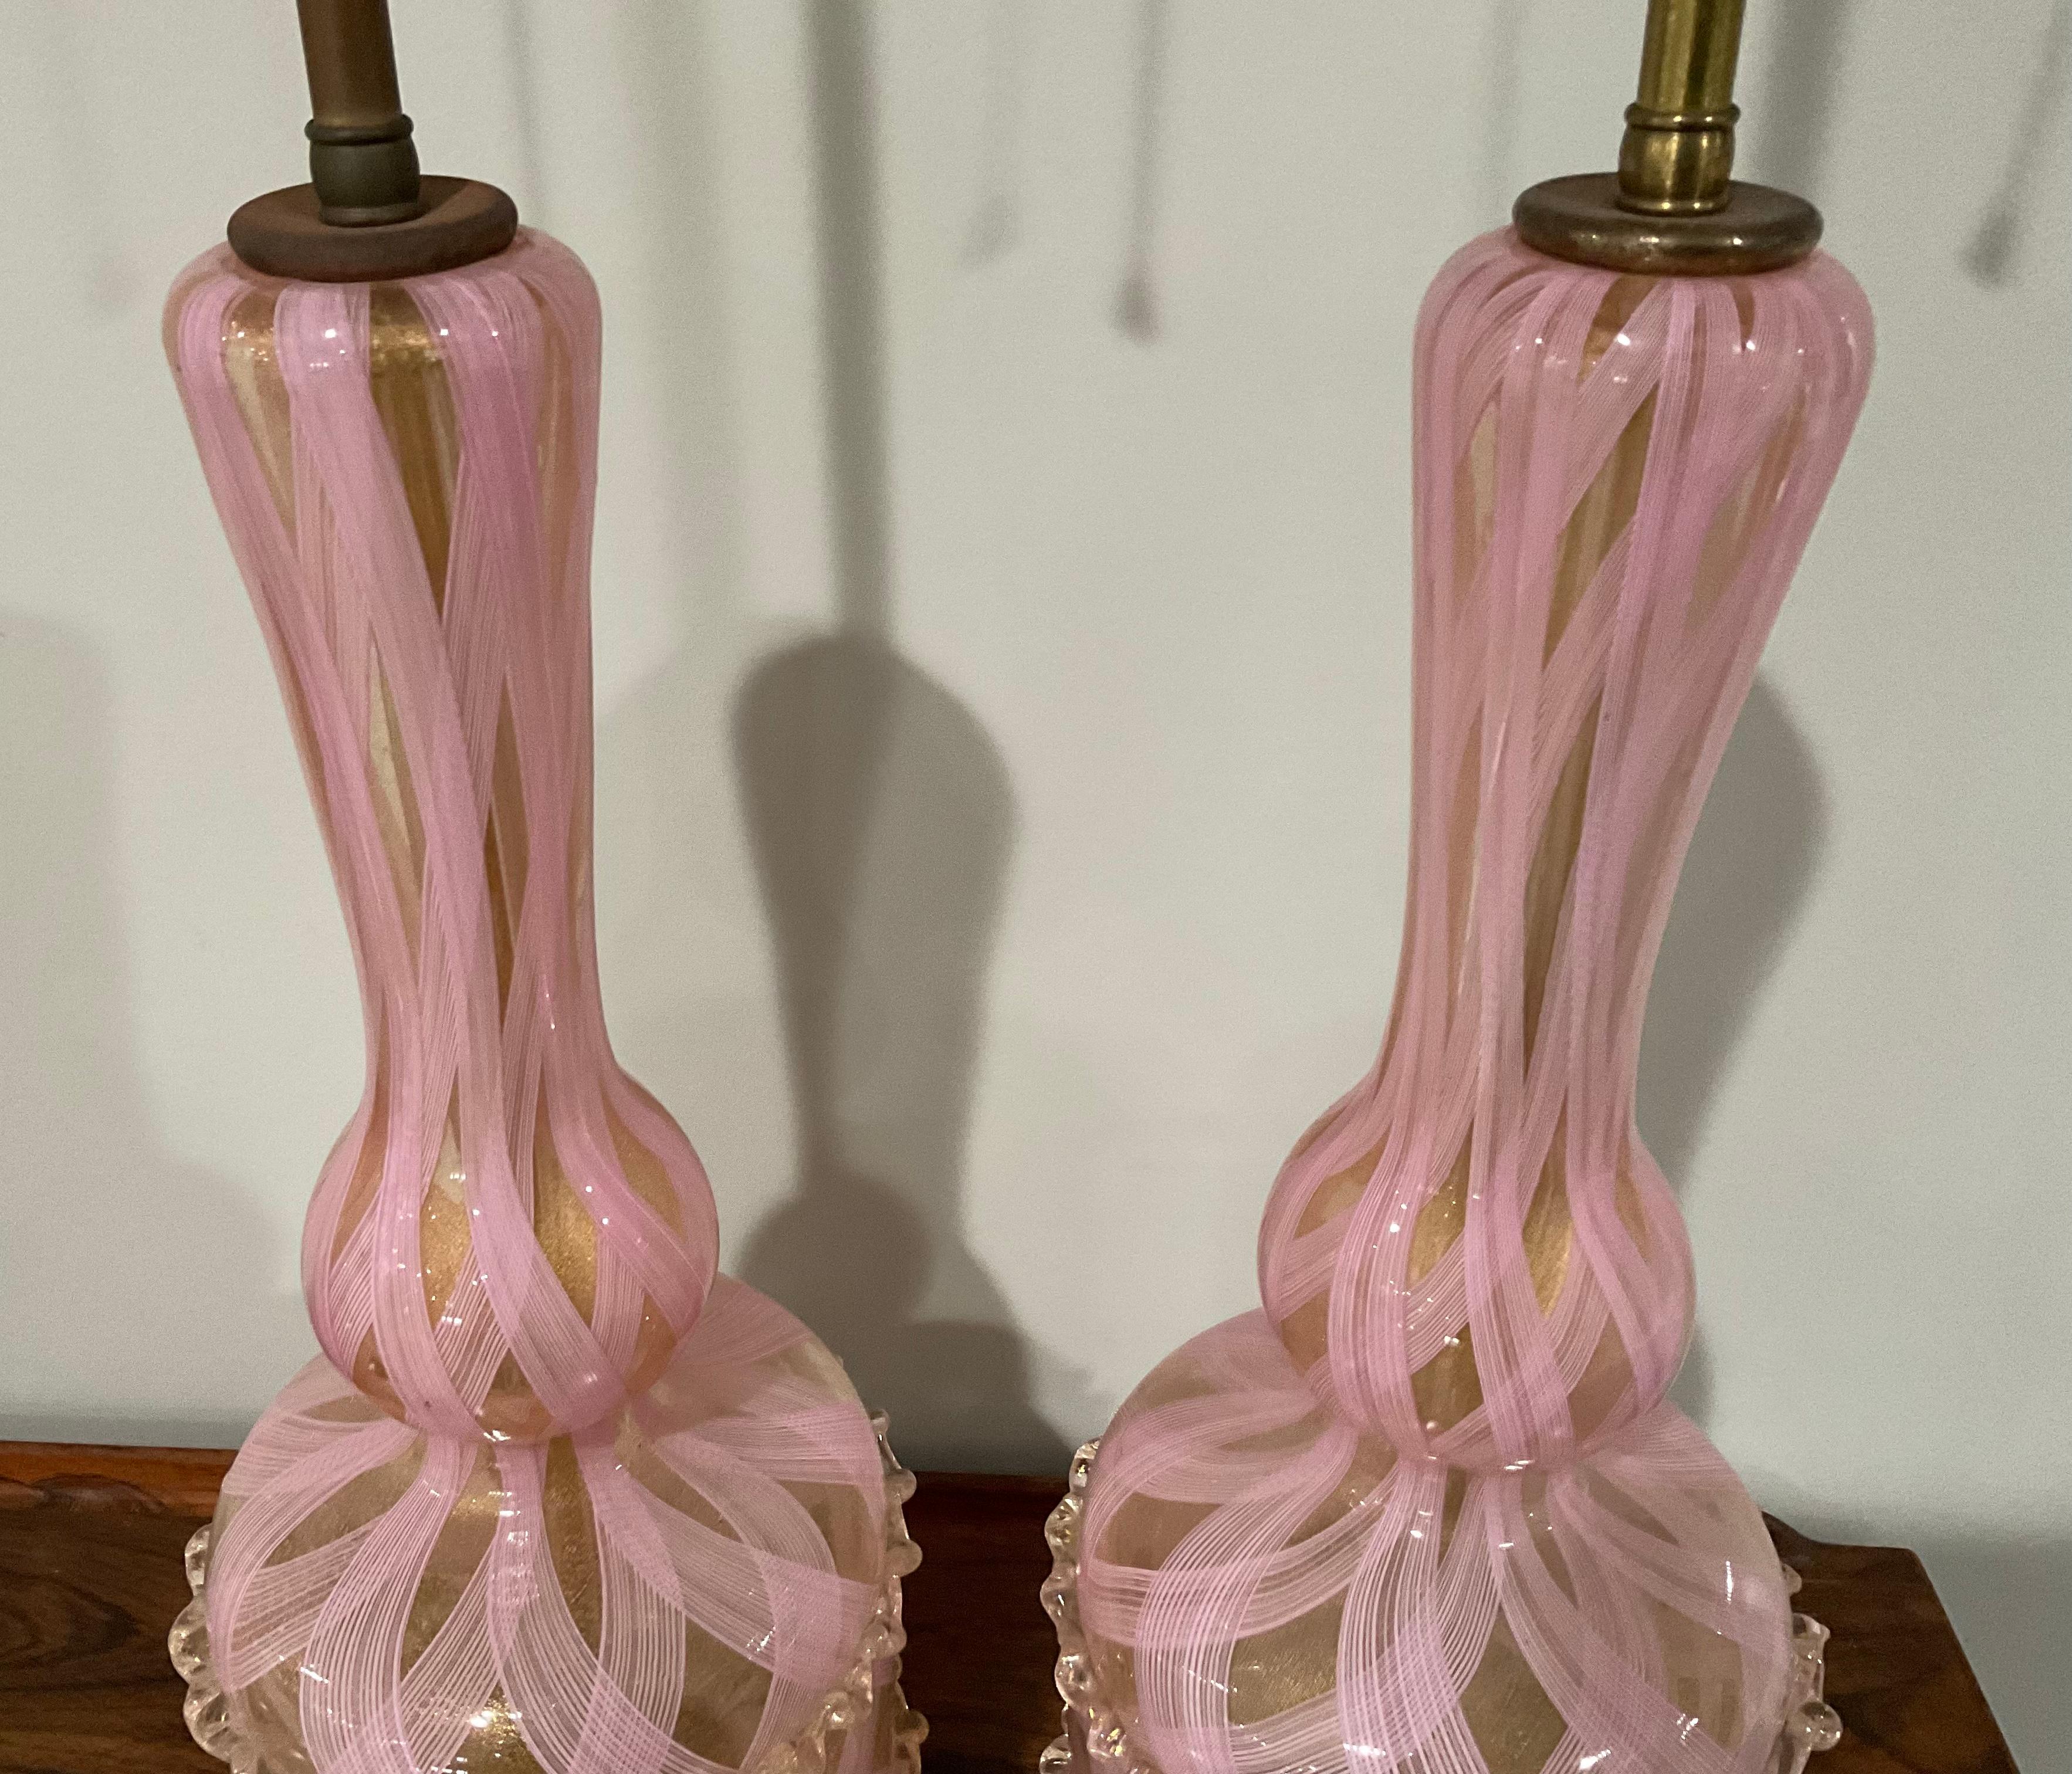 Italian Rare Pair Barovier and Toso Murano Pair Lamps in Pink and Gold Ercole Barovier For Sale